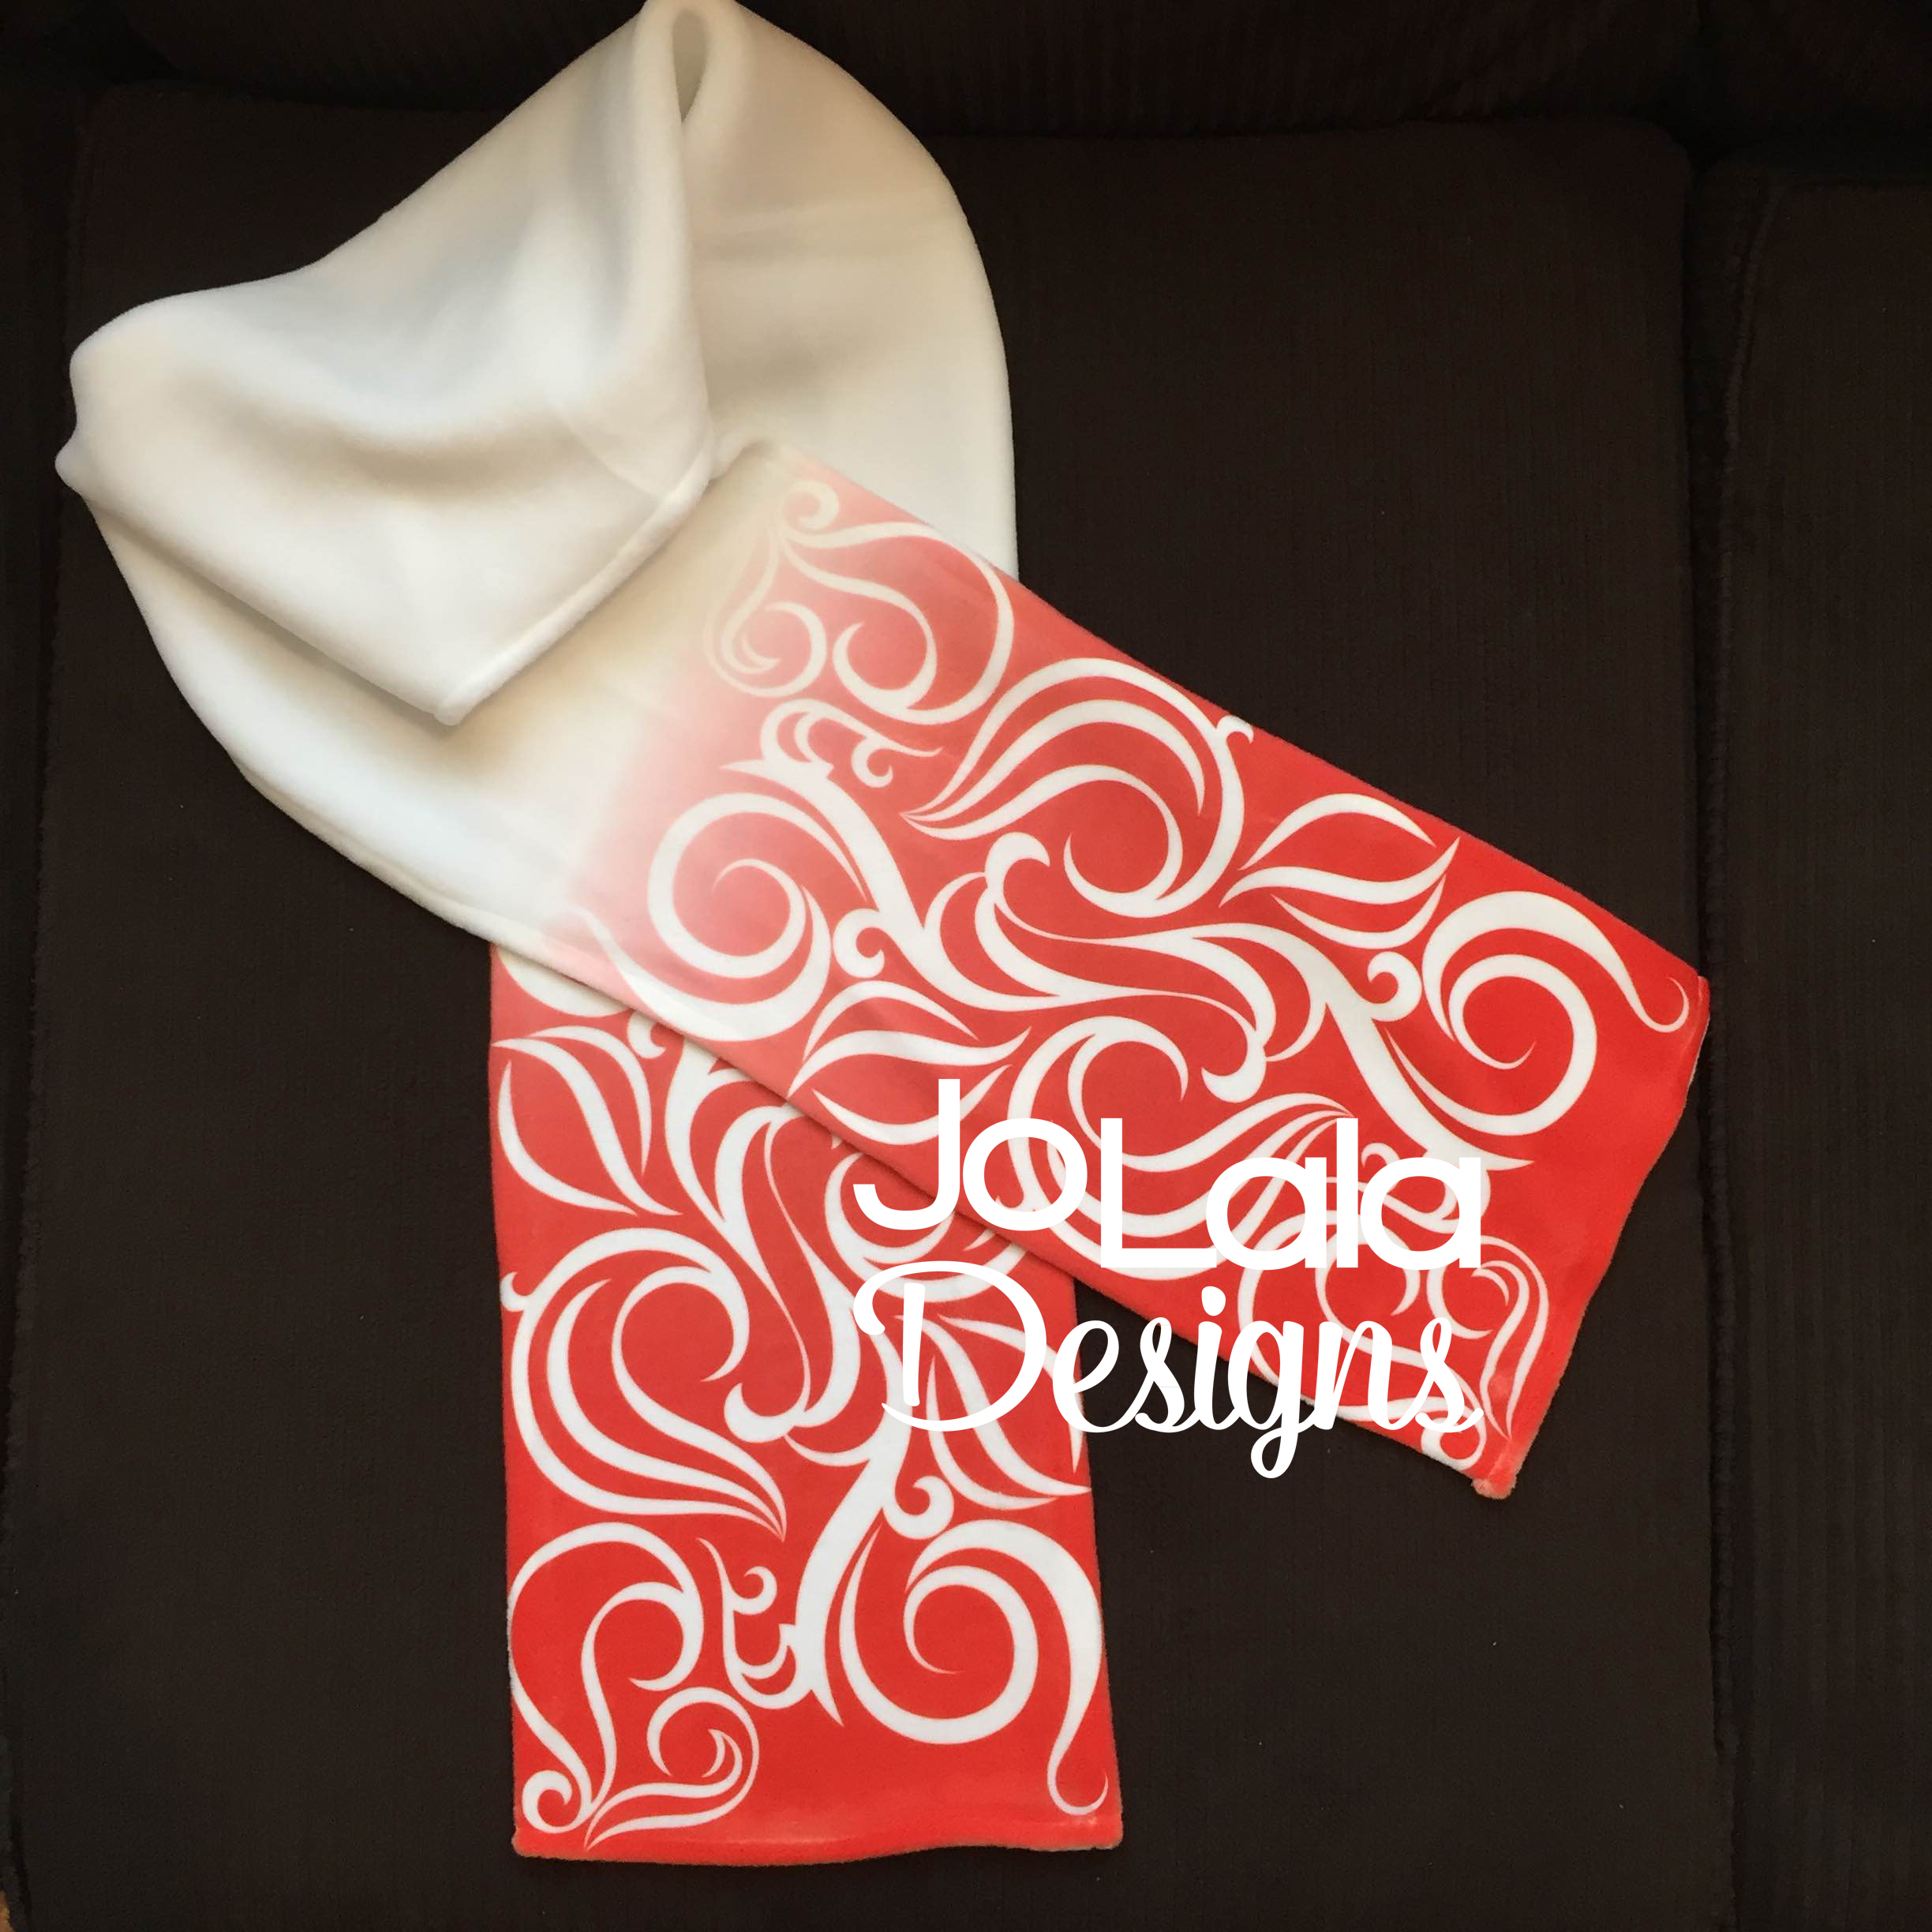 Red & White Flourish Scarf made with sublimation printing